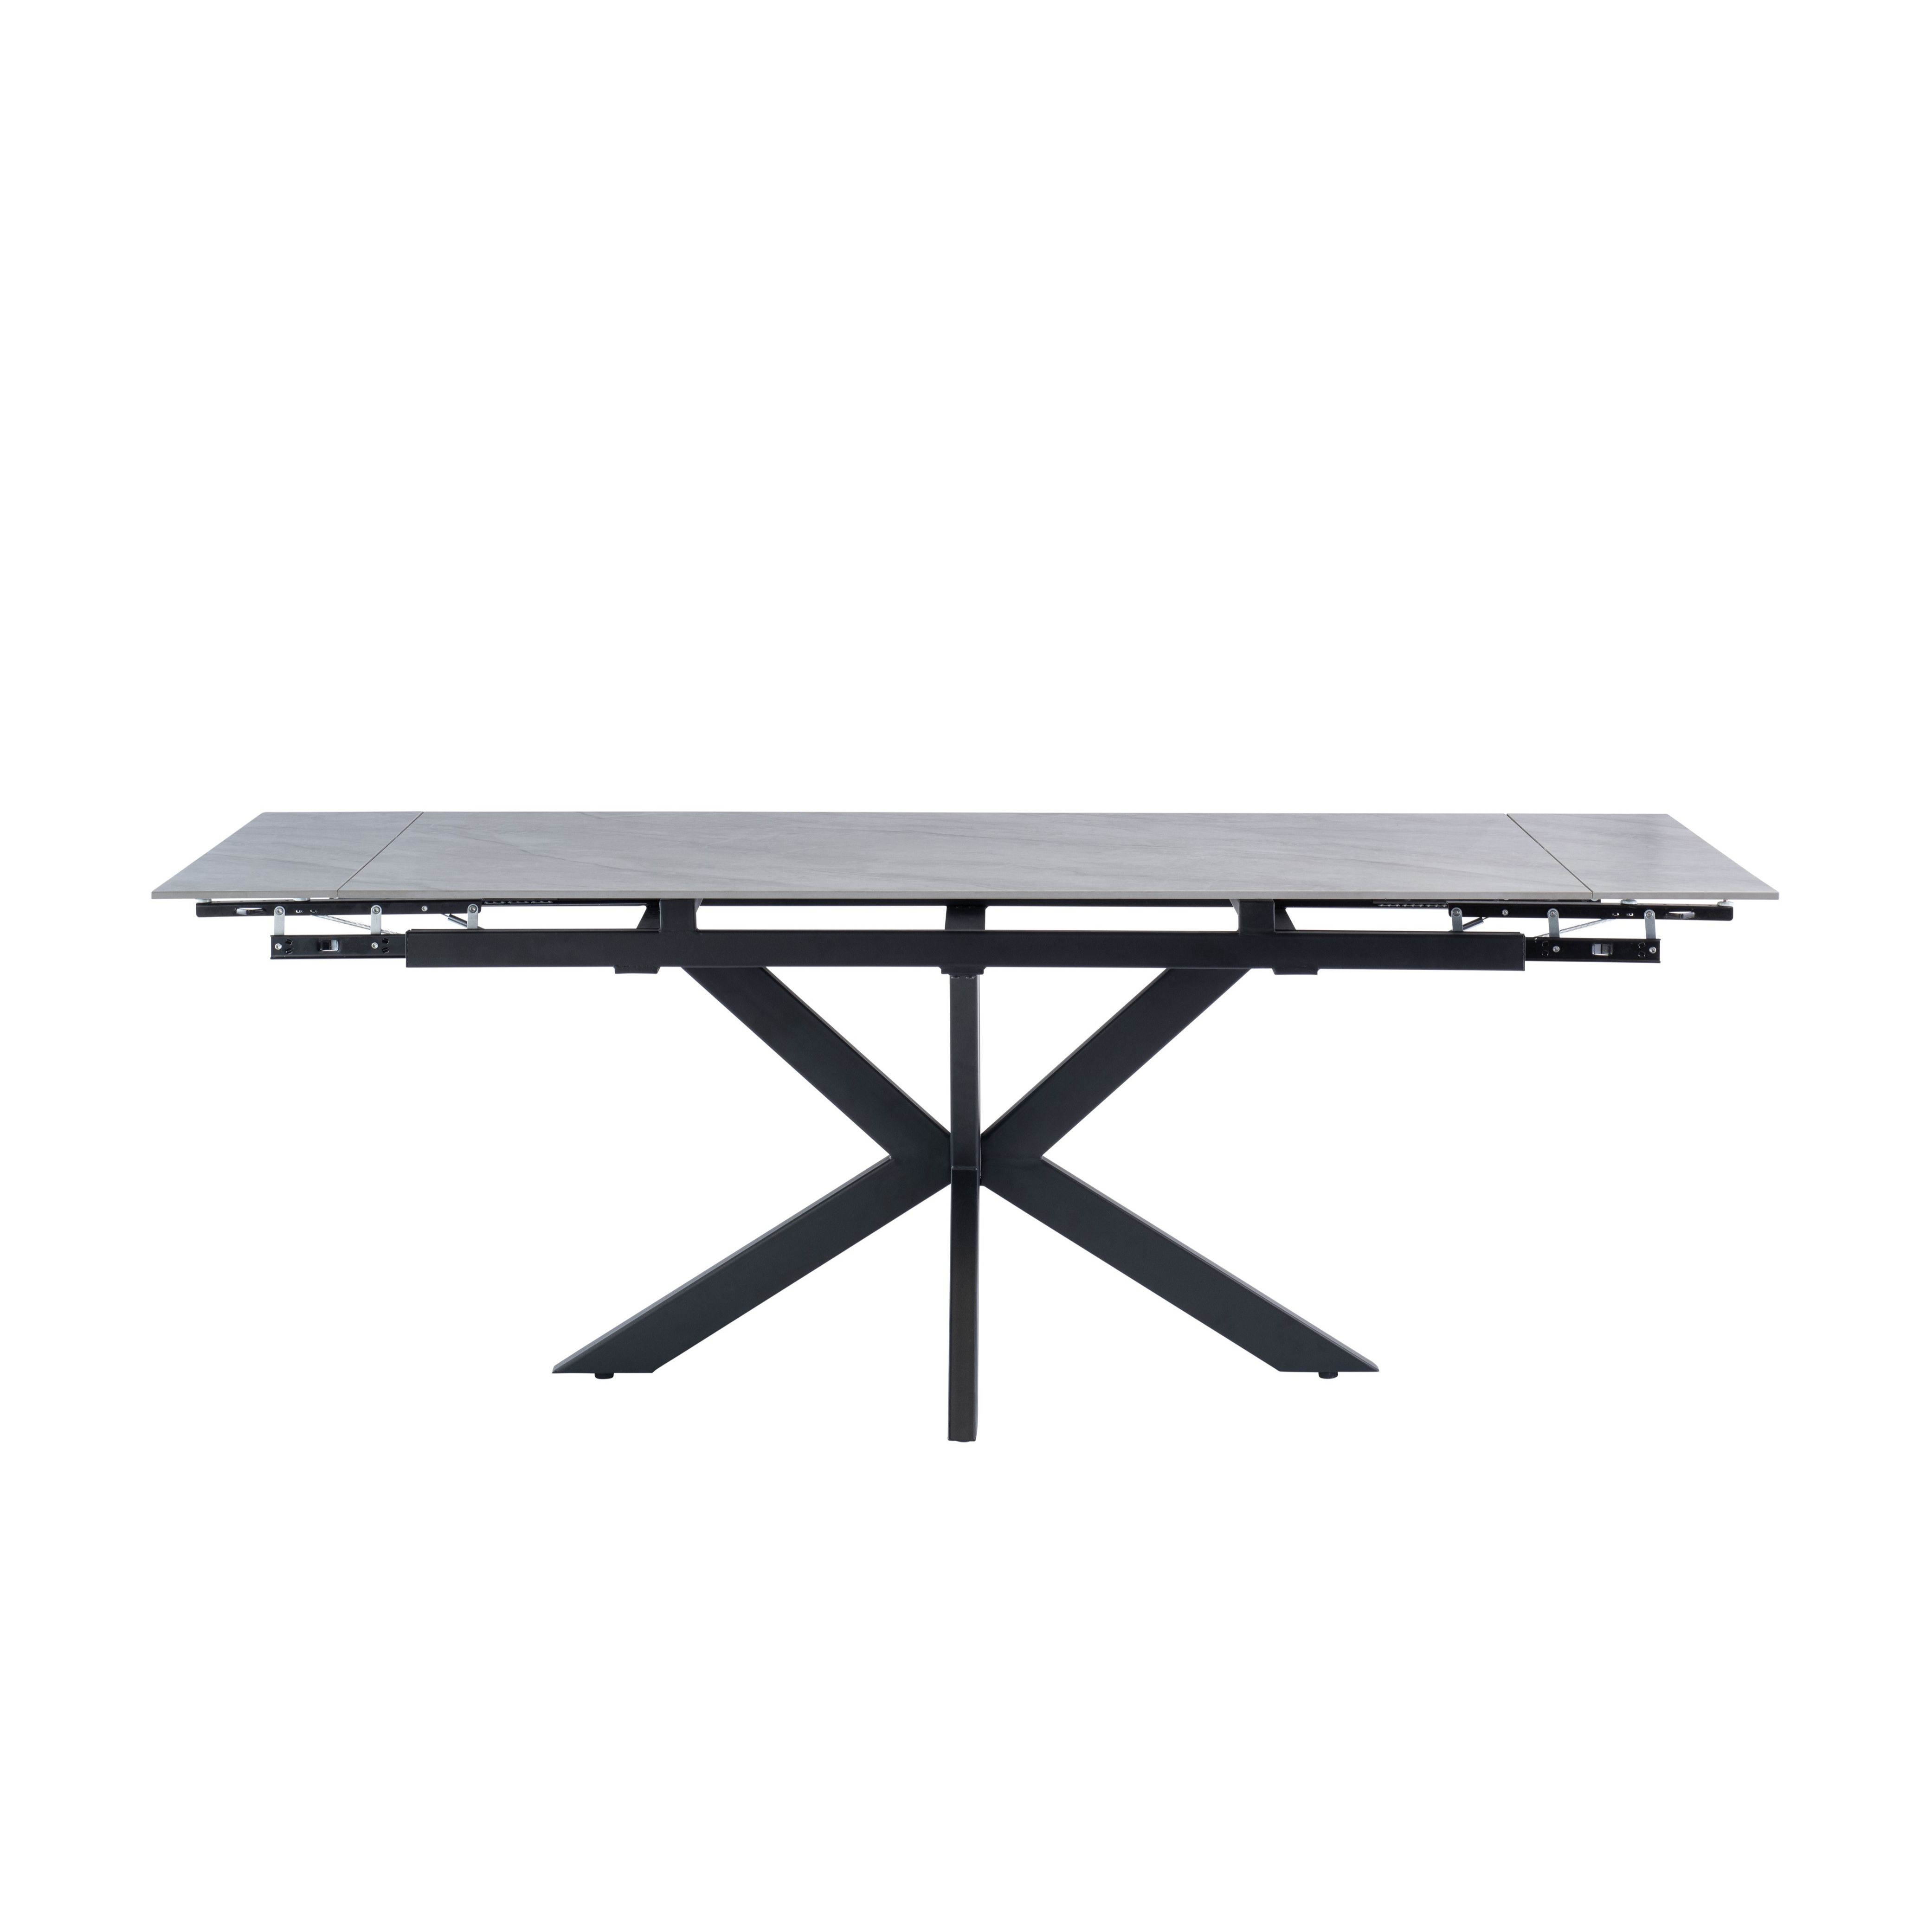 Sutton 6-8 Seater Rectangular Extendable Dining Table, Grey Sintered Stone